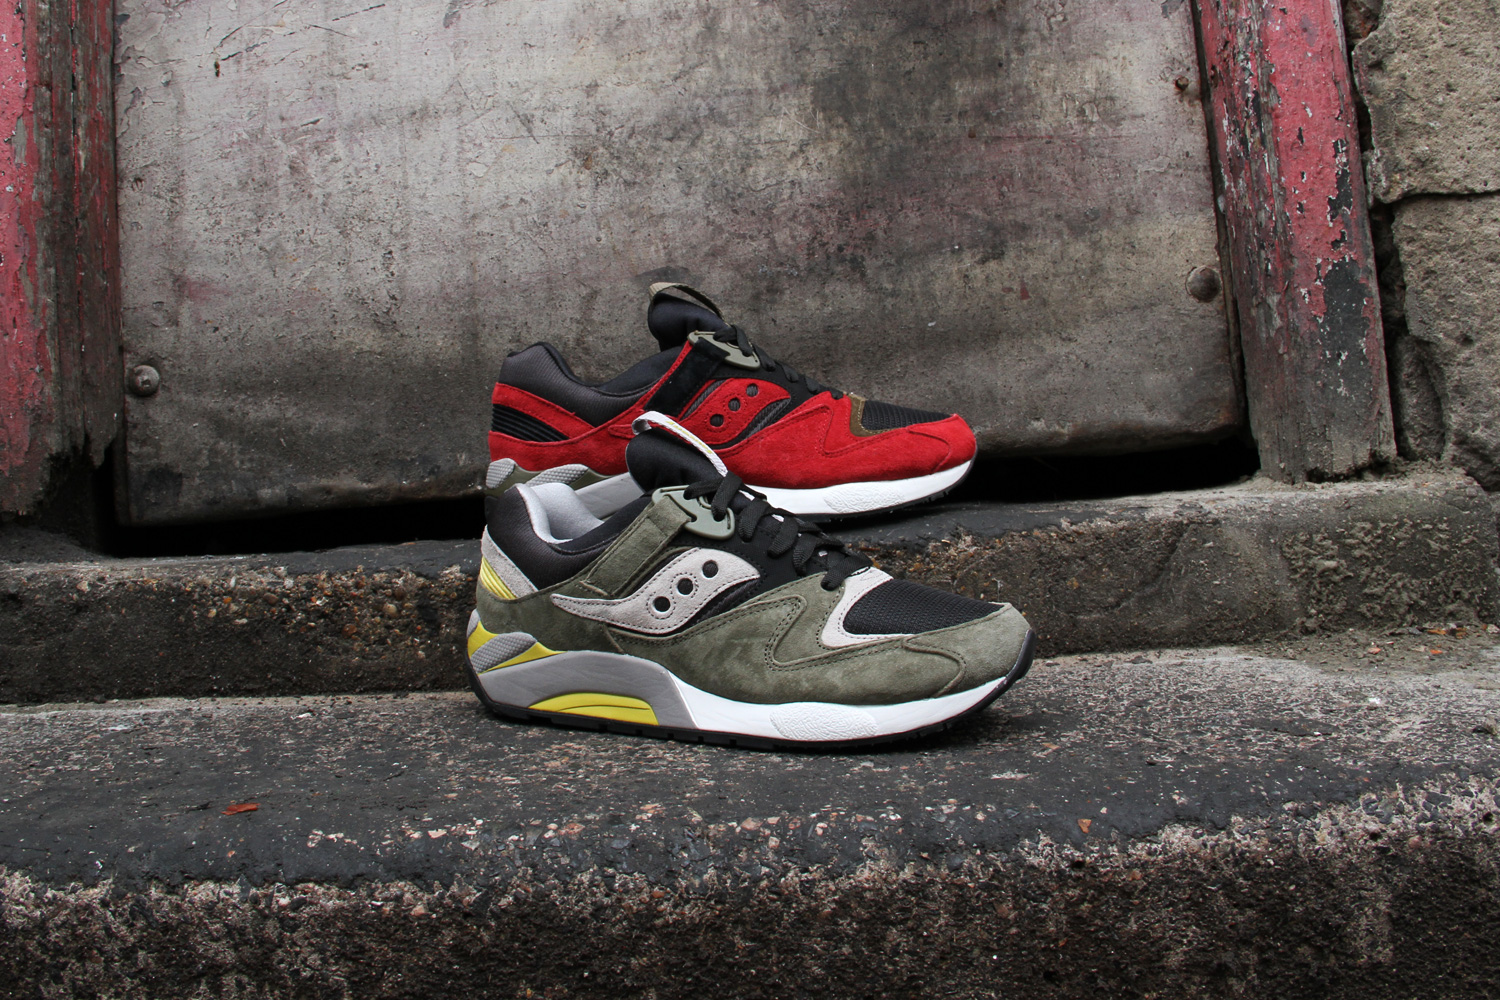 saucony grid 9000 spice